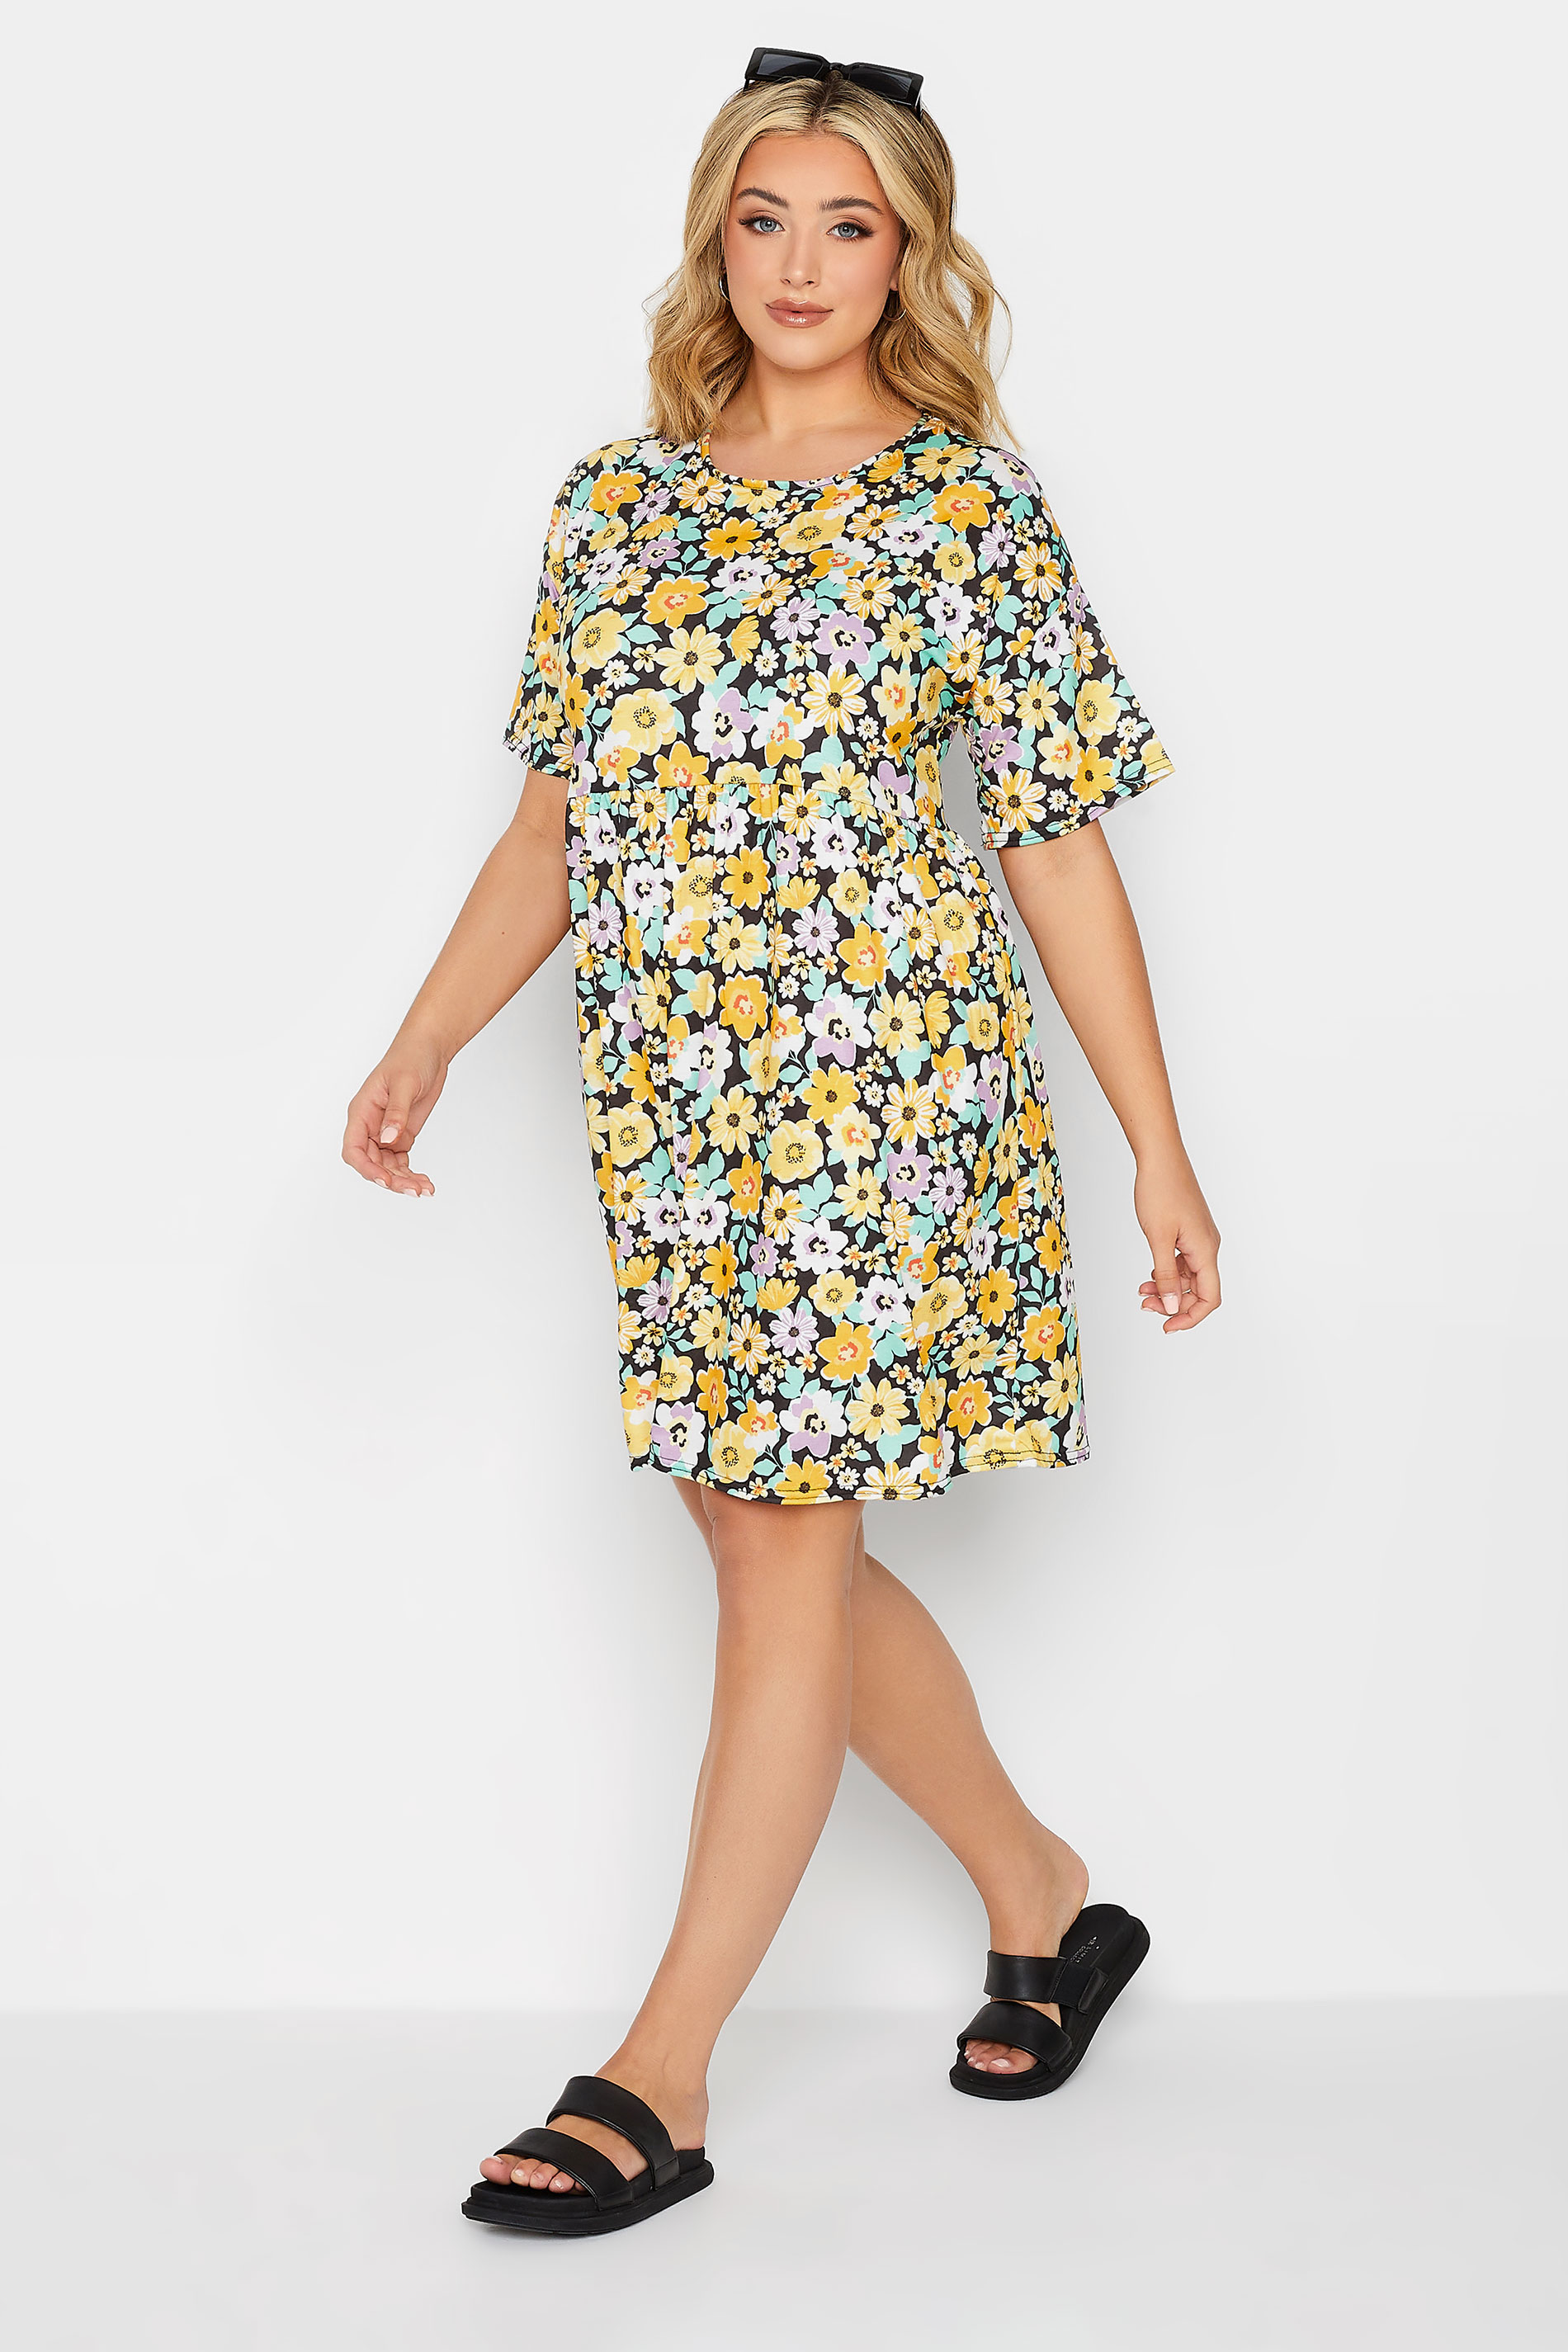 YOURS PETITE Plus Size Yellow Floral Print Smock Dress | Yours Clothing 1